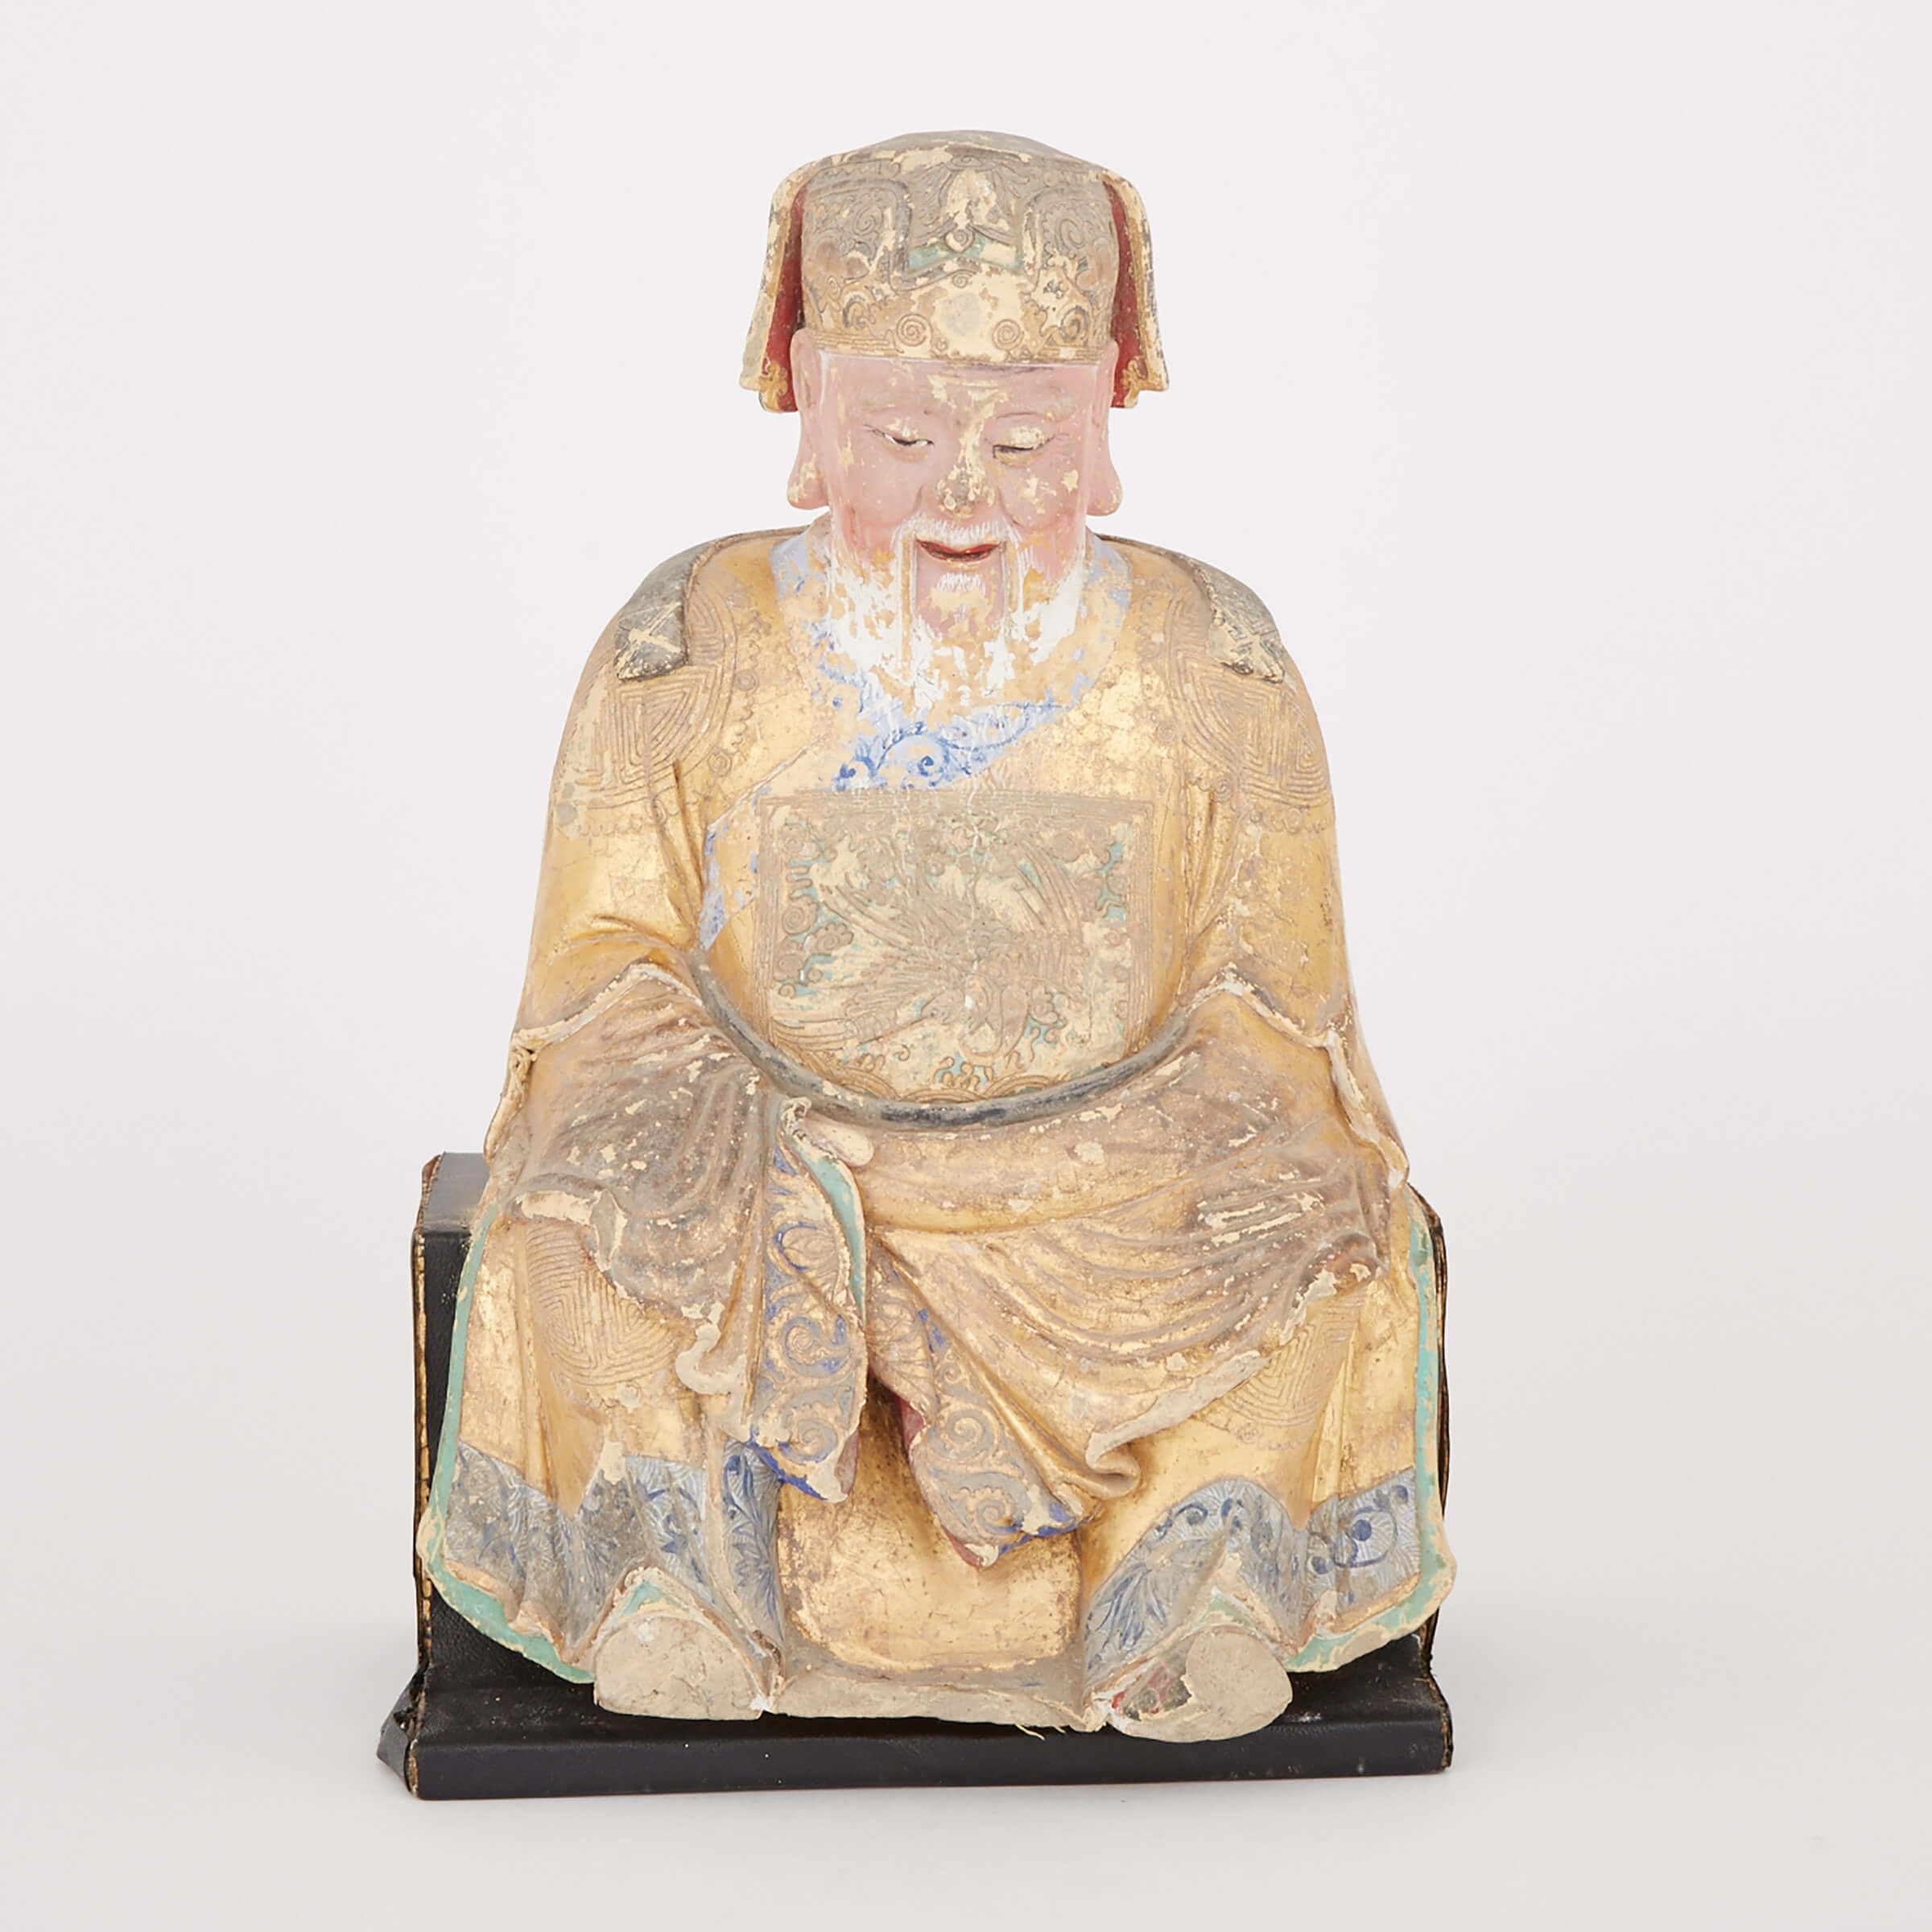 A Seated ‘God of Wealth’ Figure